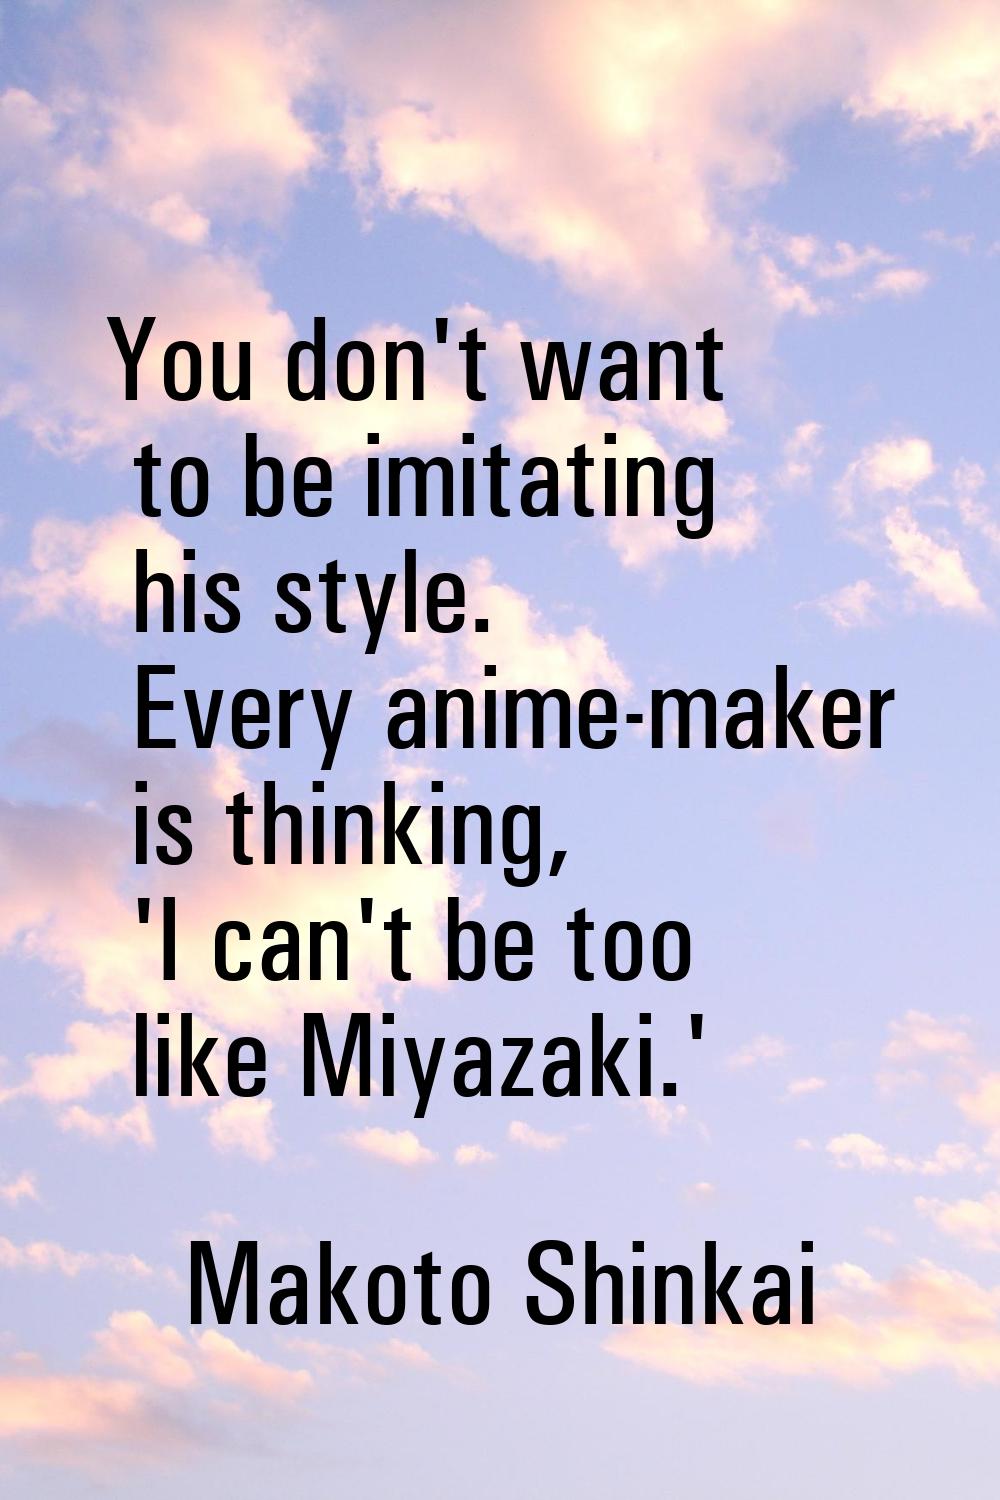 You don't want to be imitating his style. Every anime-maker is thinking, 'I can't be too like Miyaz